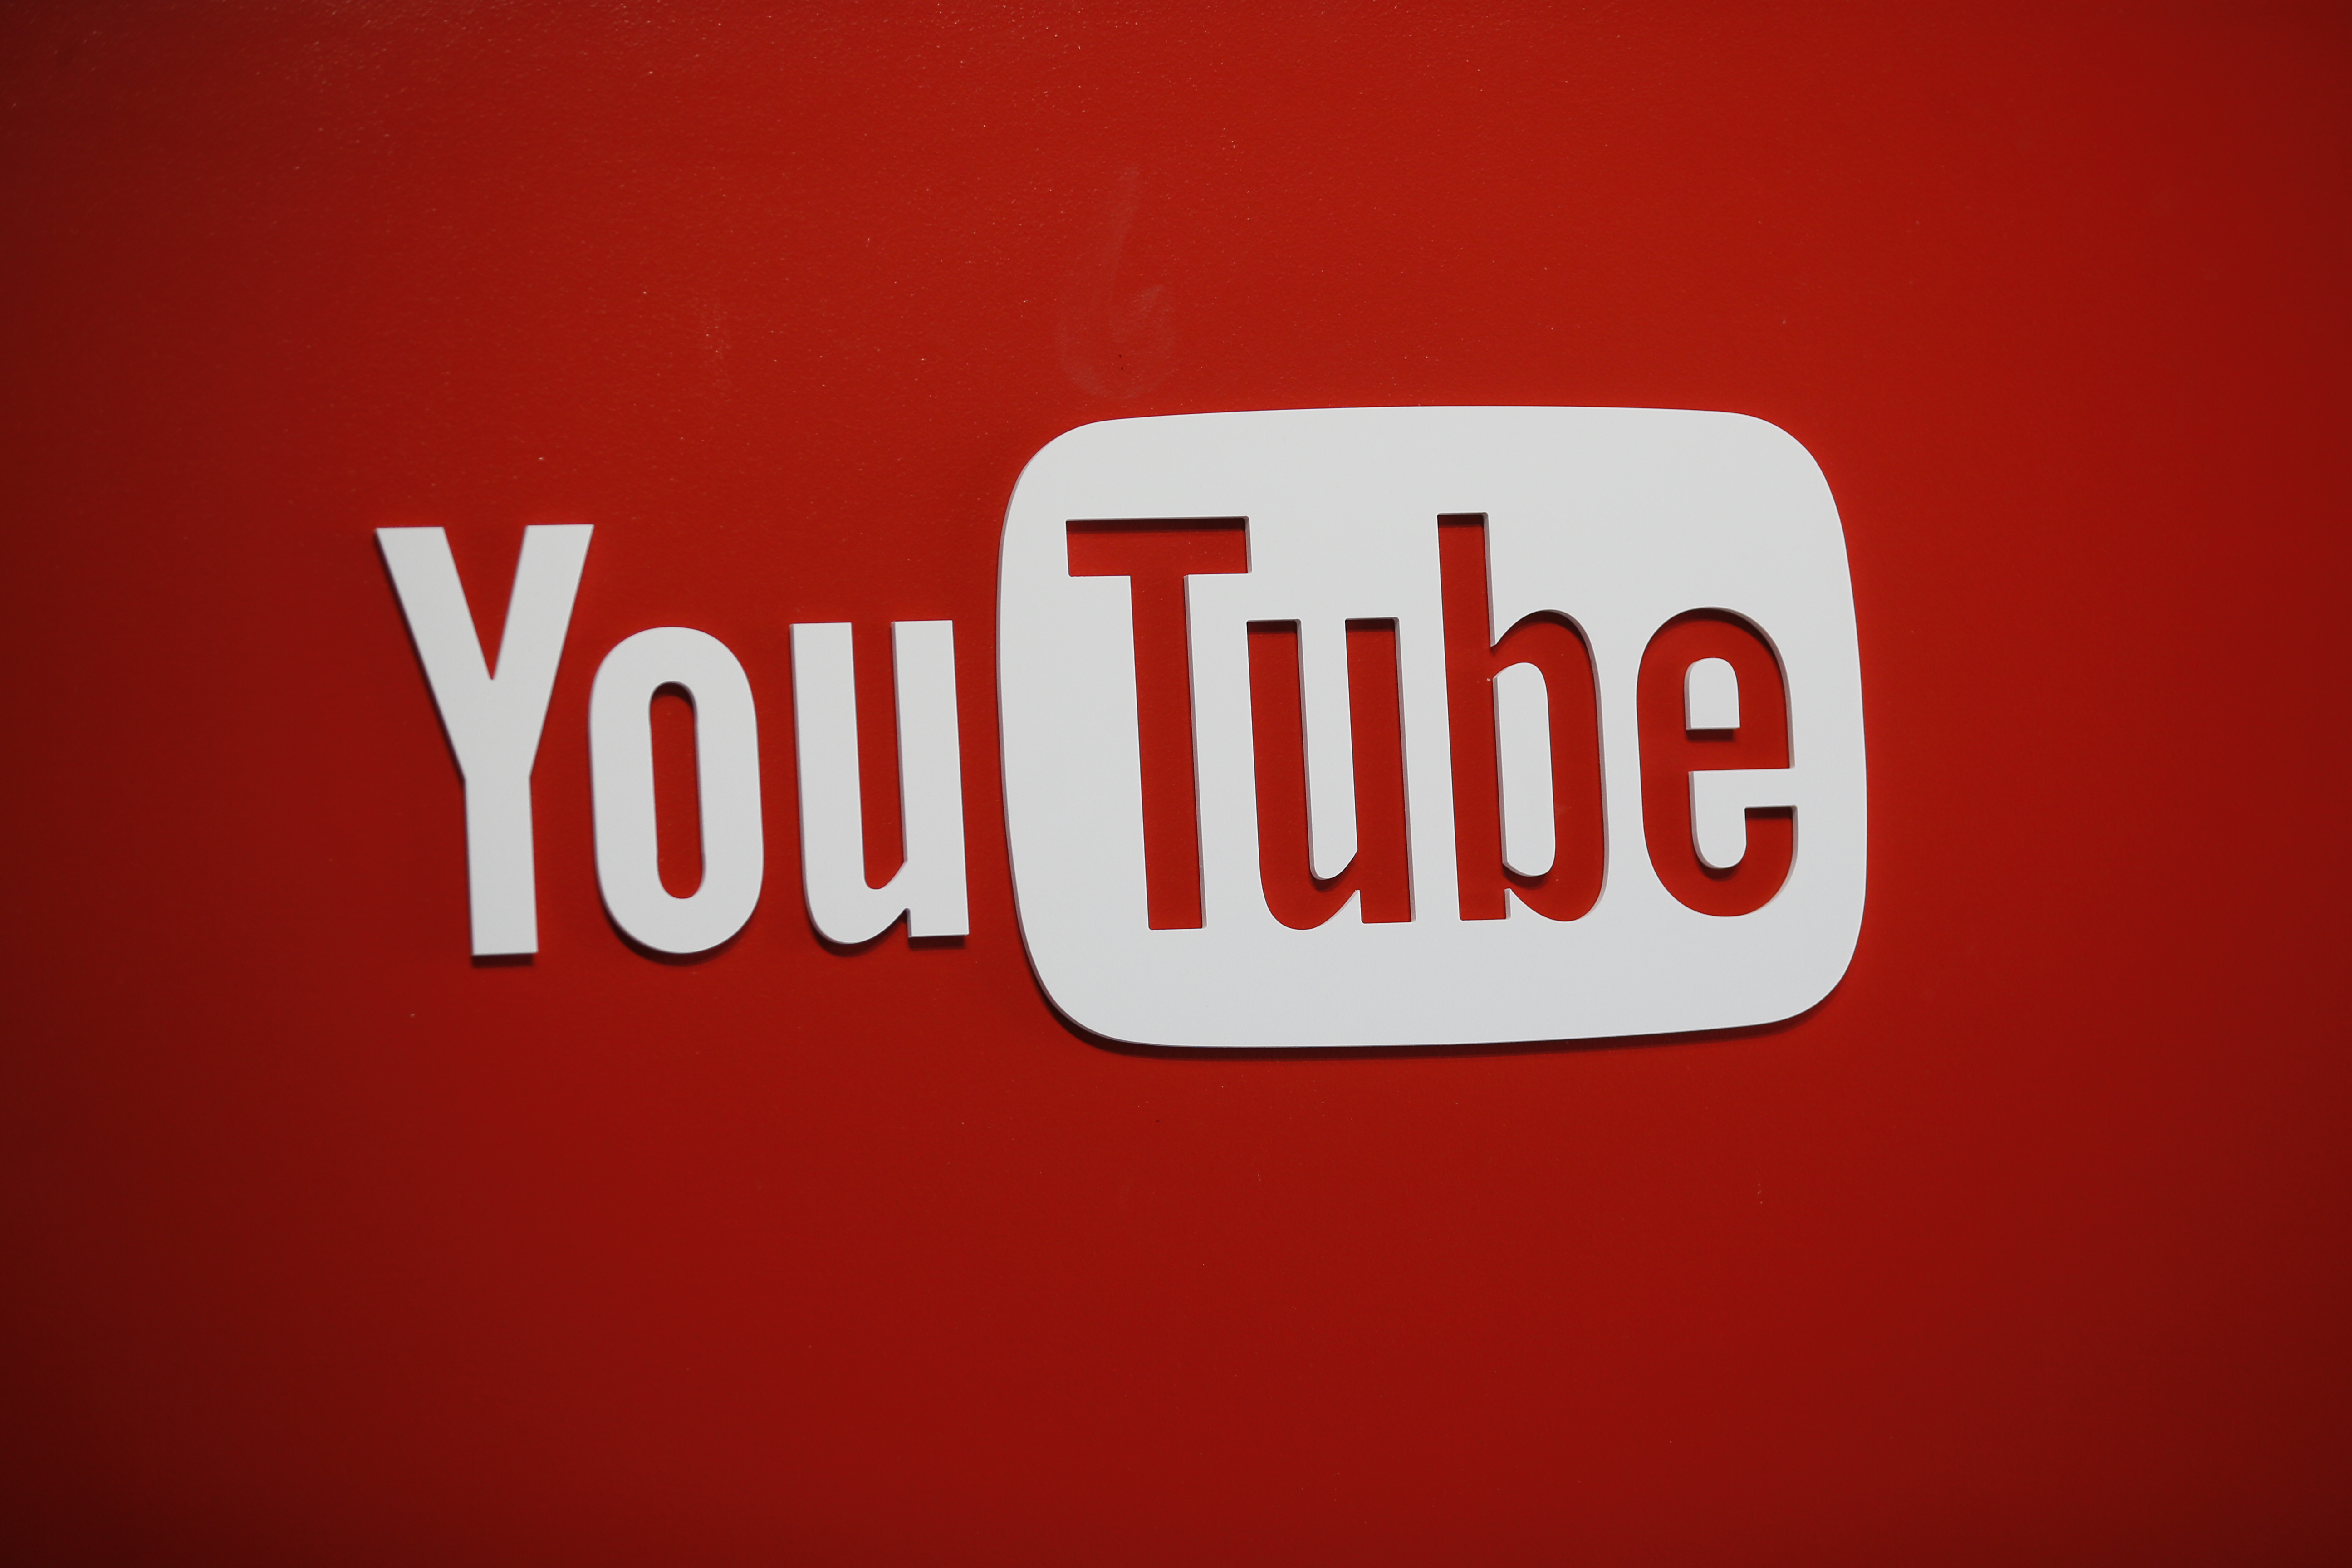 YouTube changes misinformation policy to allow videos falsely claiming fraud in the 2020 US election